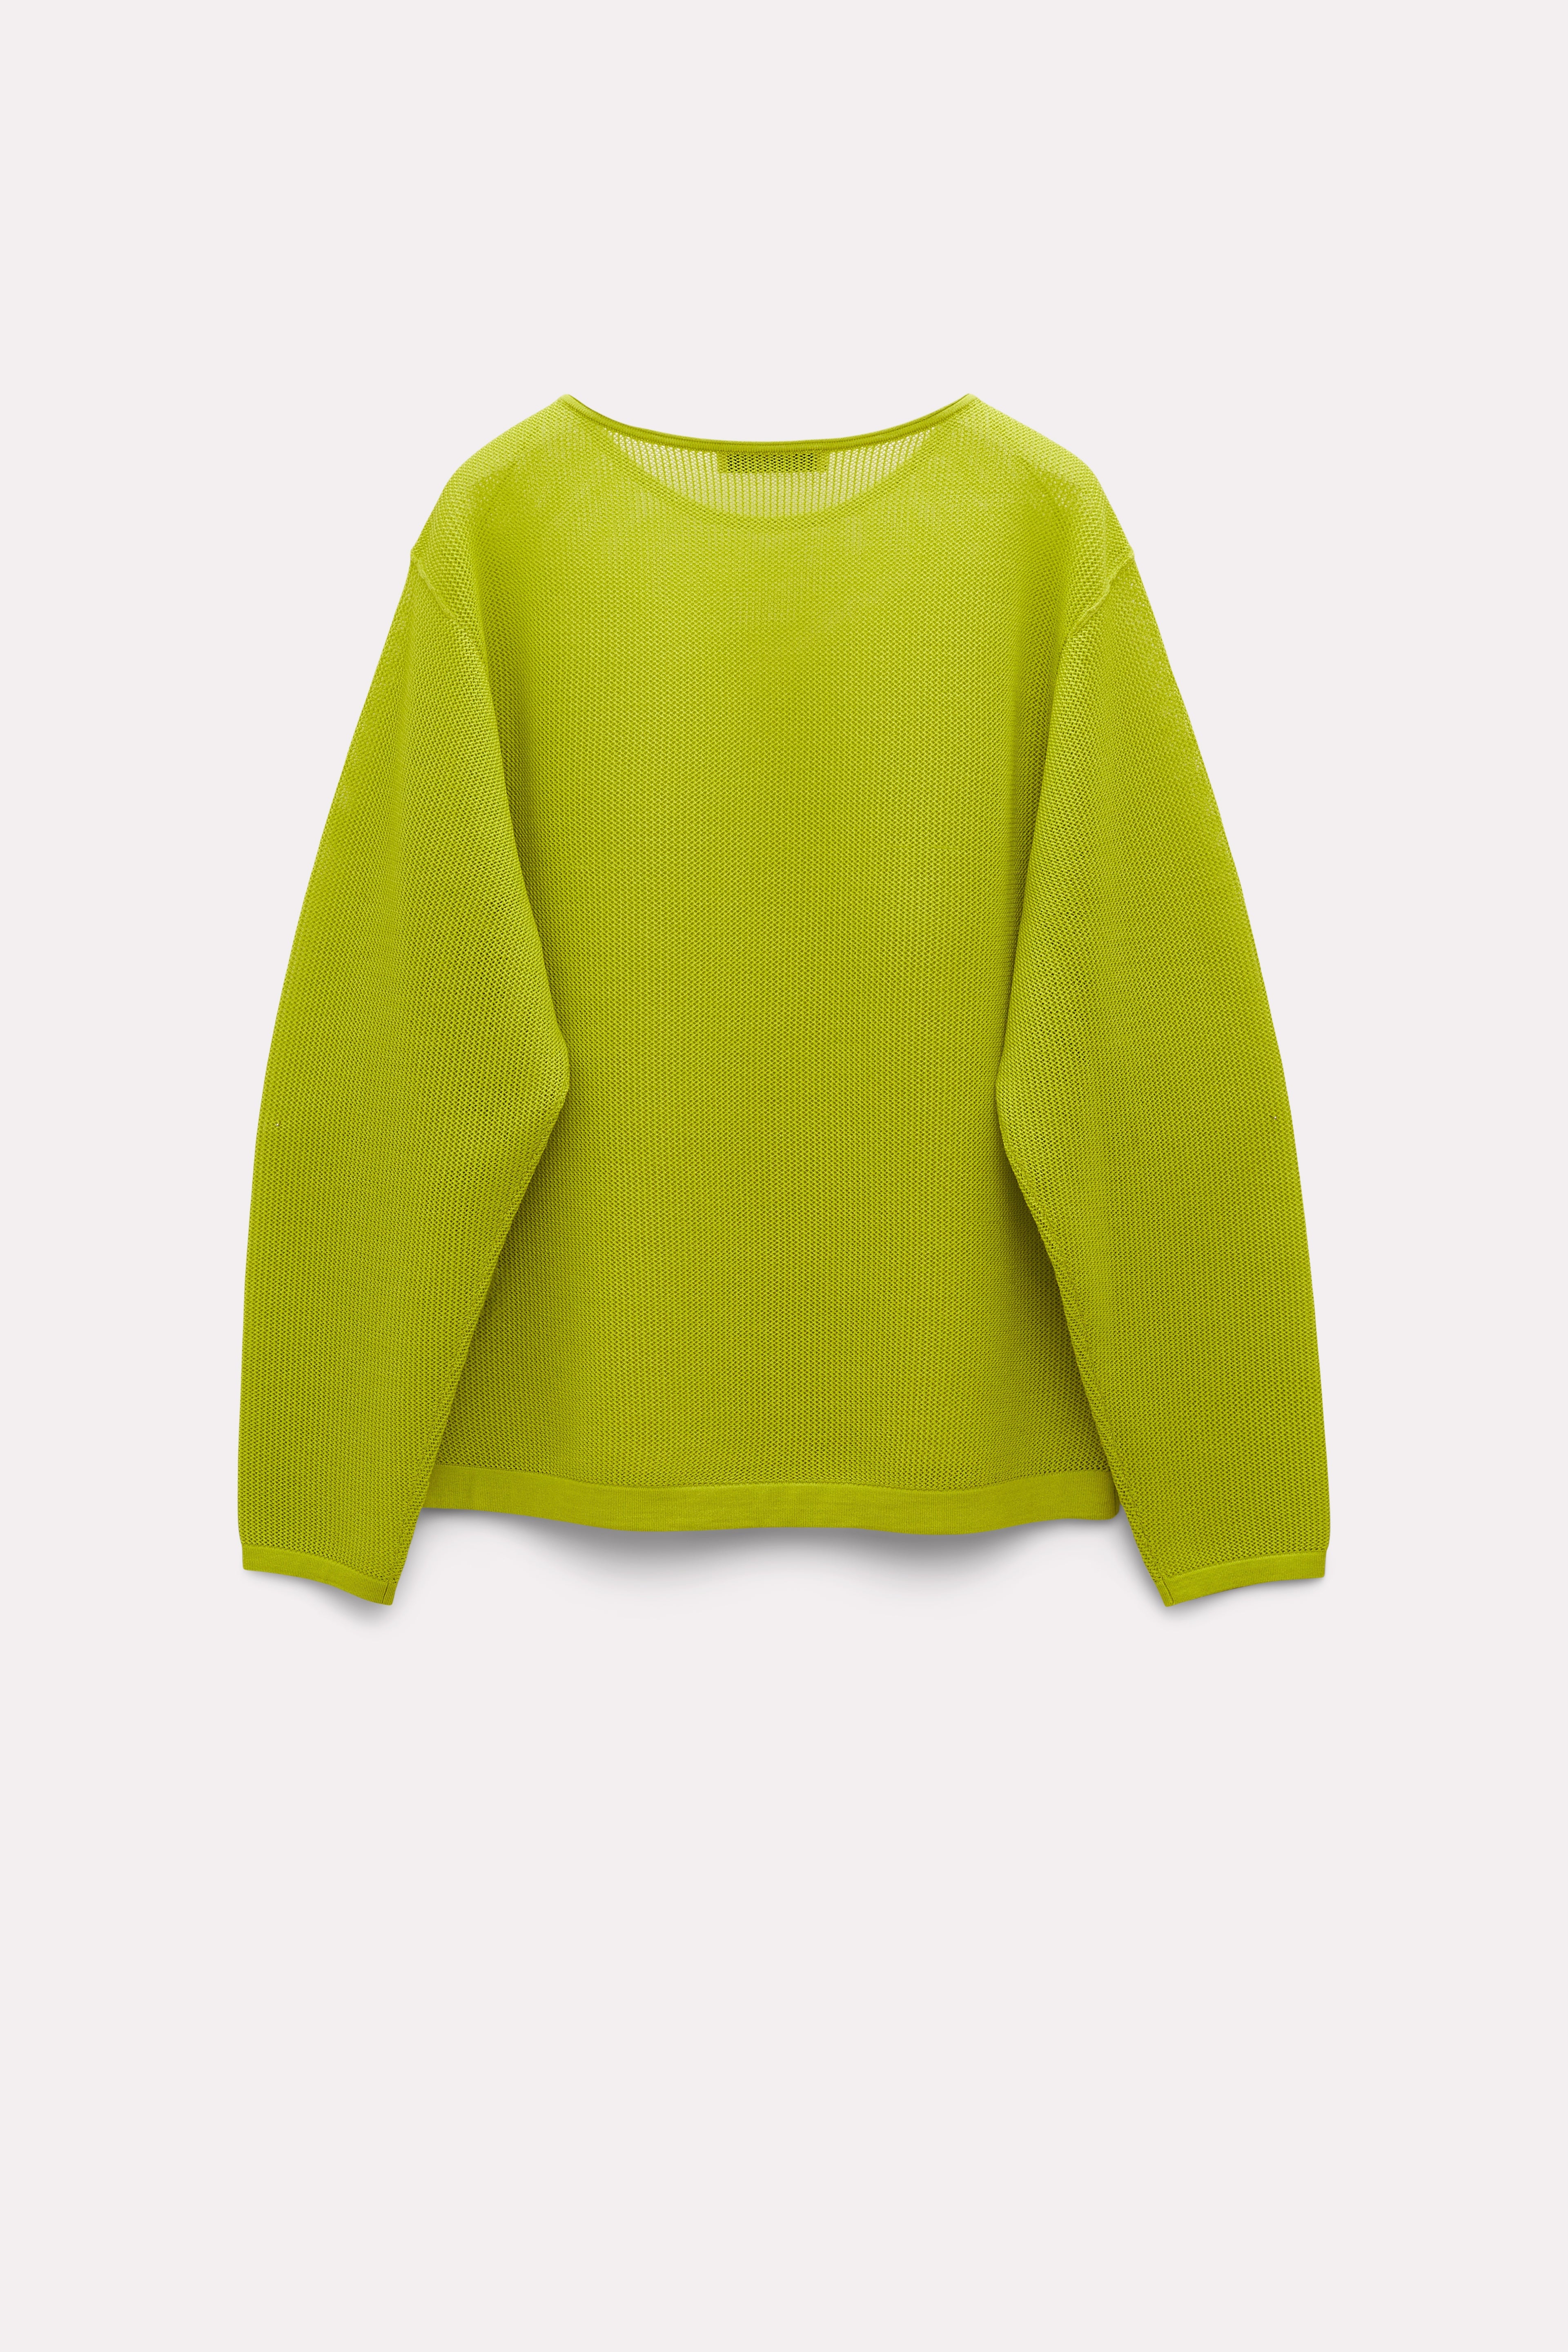 Dorothee-Schumacher-OUTLET-SALE-ESSENTIAL-EASE-pullover-Strick-ARCHIVE-COLLECTION-2_bfa6410c-ad05-4839-a8e3-455f526547d3.jpg